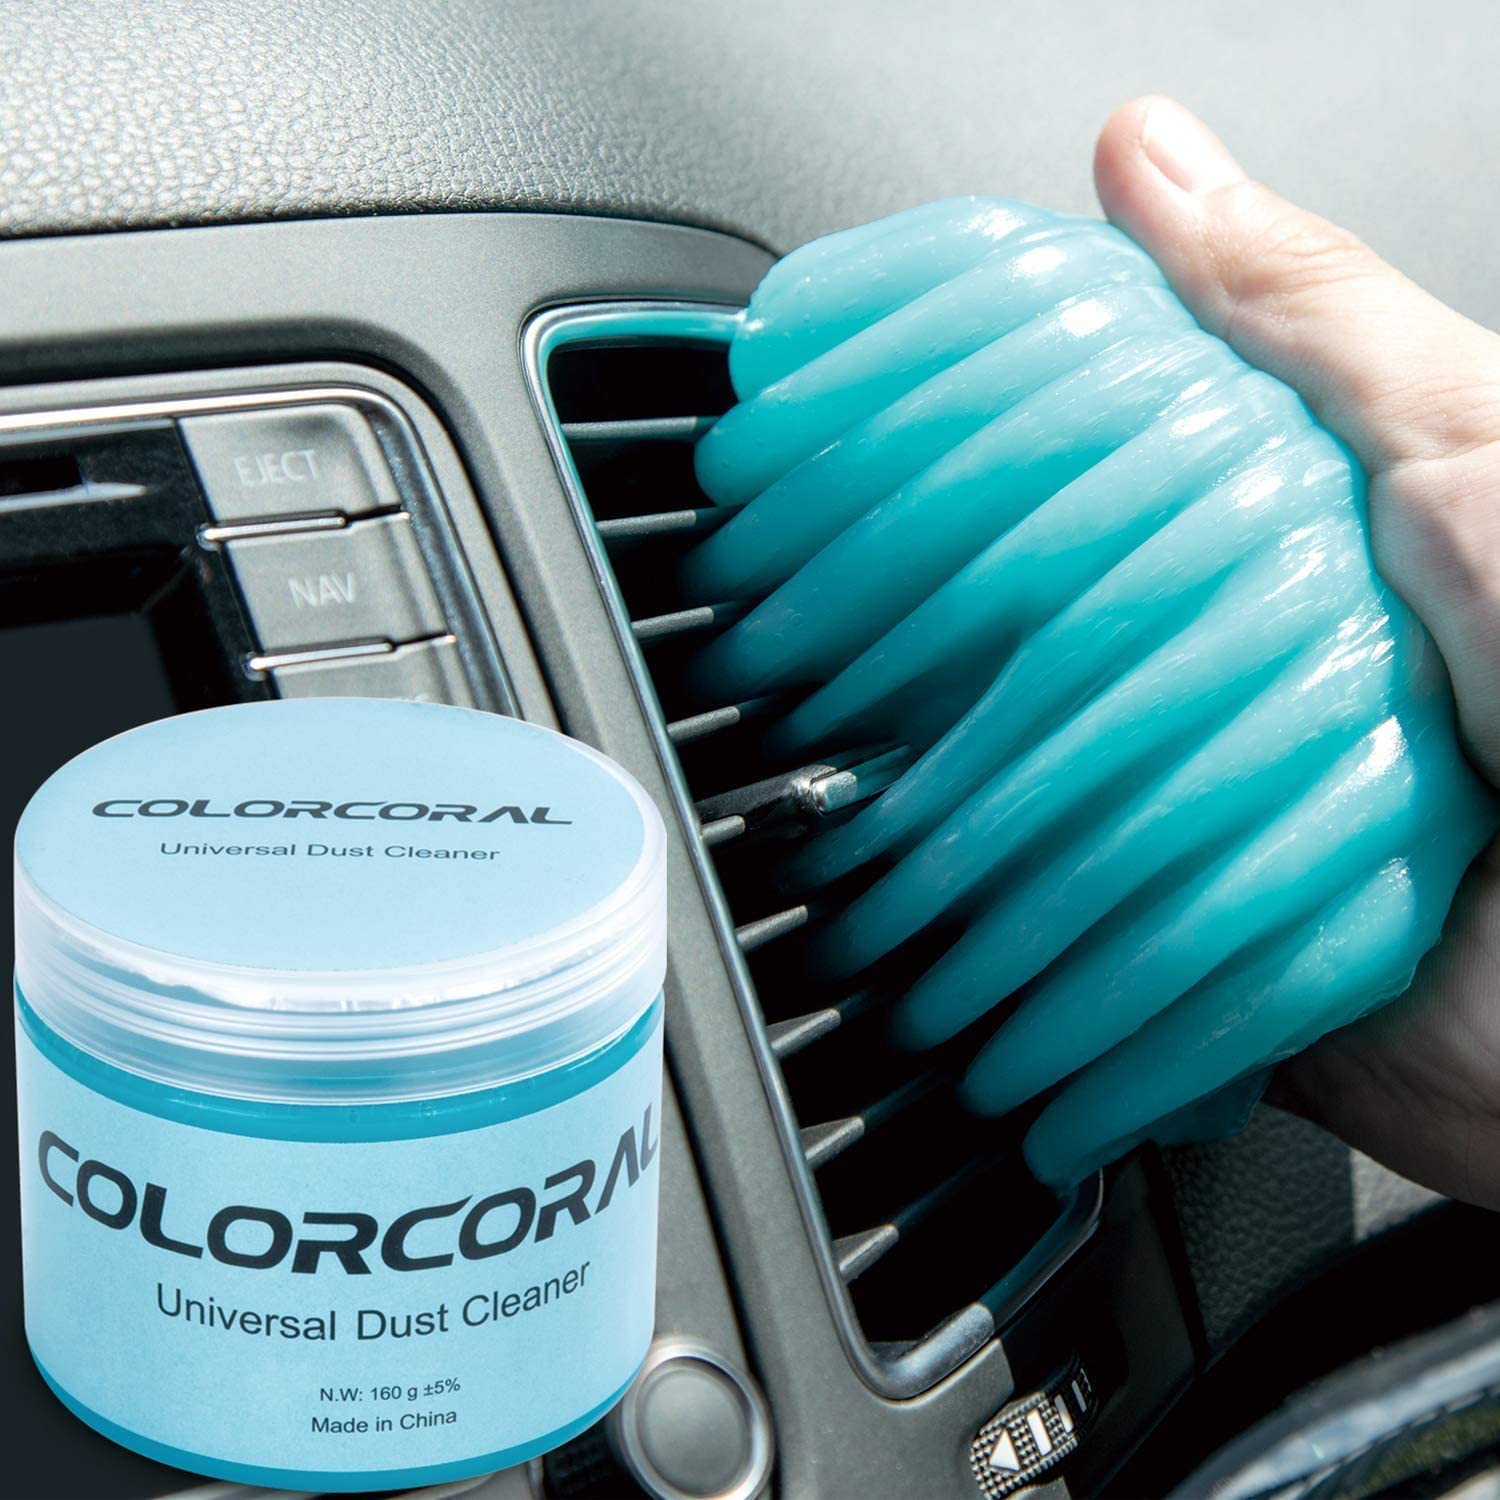 ColorCoral cOLORcORAL cleaning gel for car Universal gel cleaner Auto  Detailing car Vent Keyboard cleaning Putty car Interior cleaner Dashb